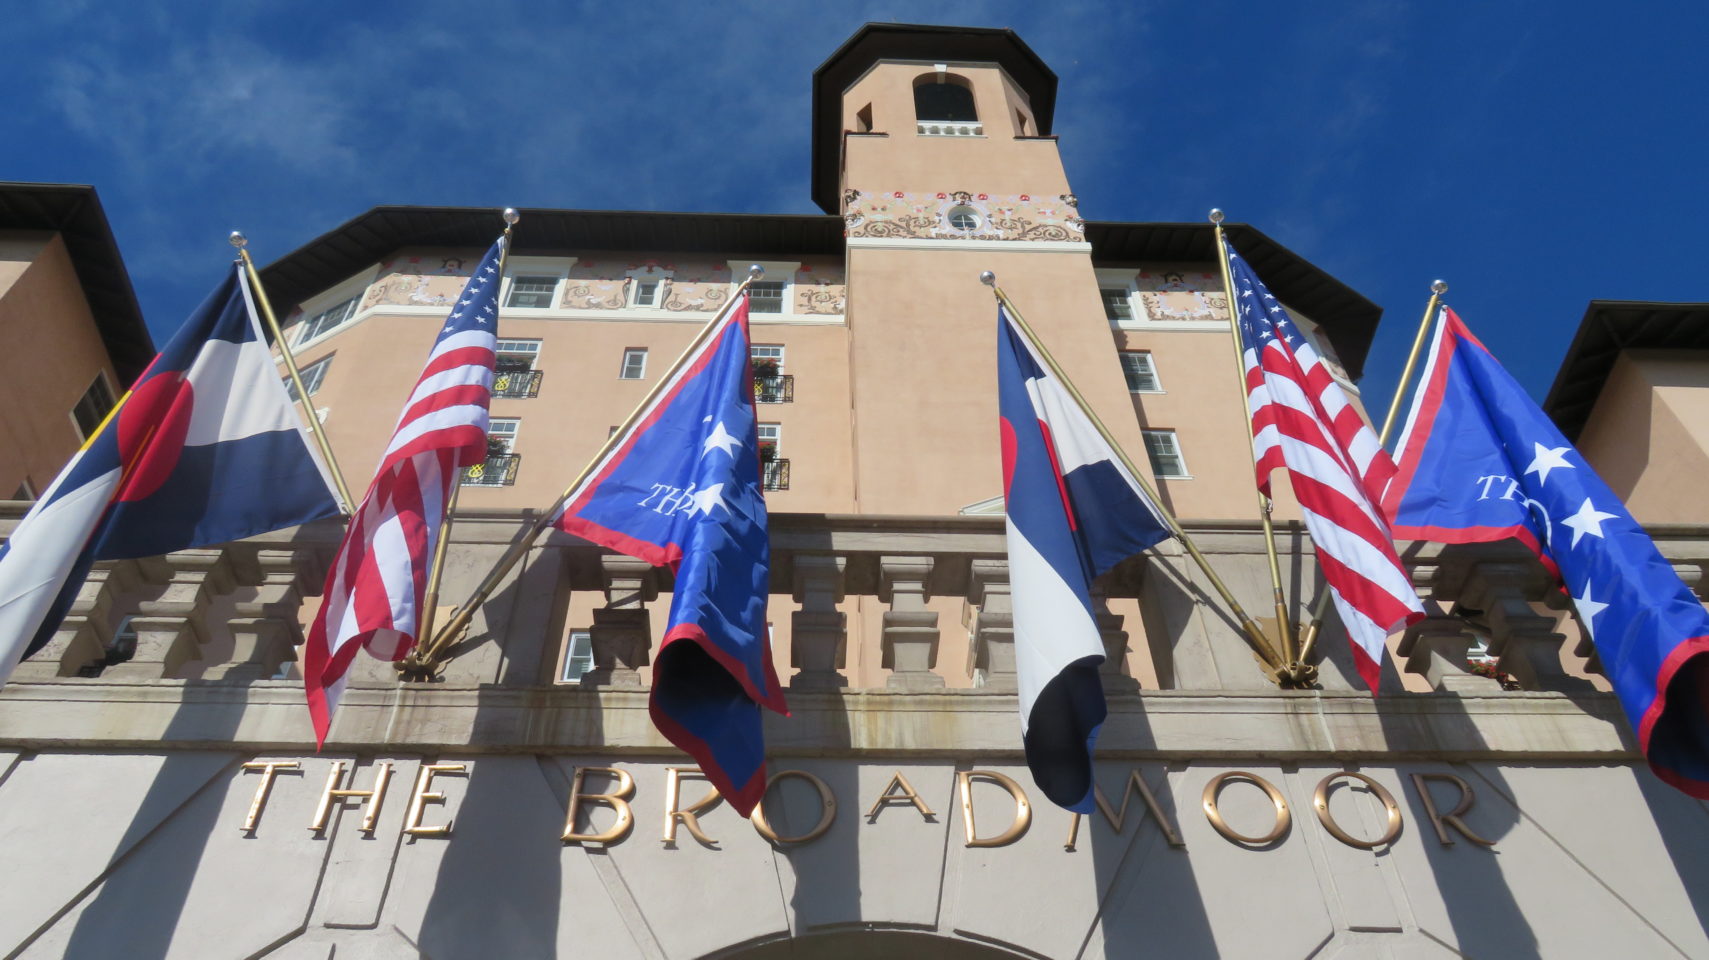 The Broadmoor ~ One of the Finest Resorts in the World